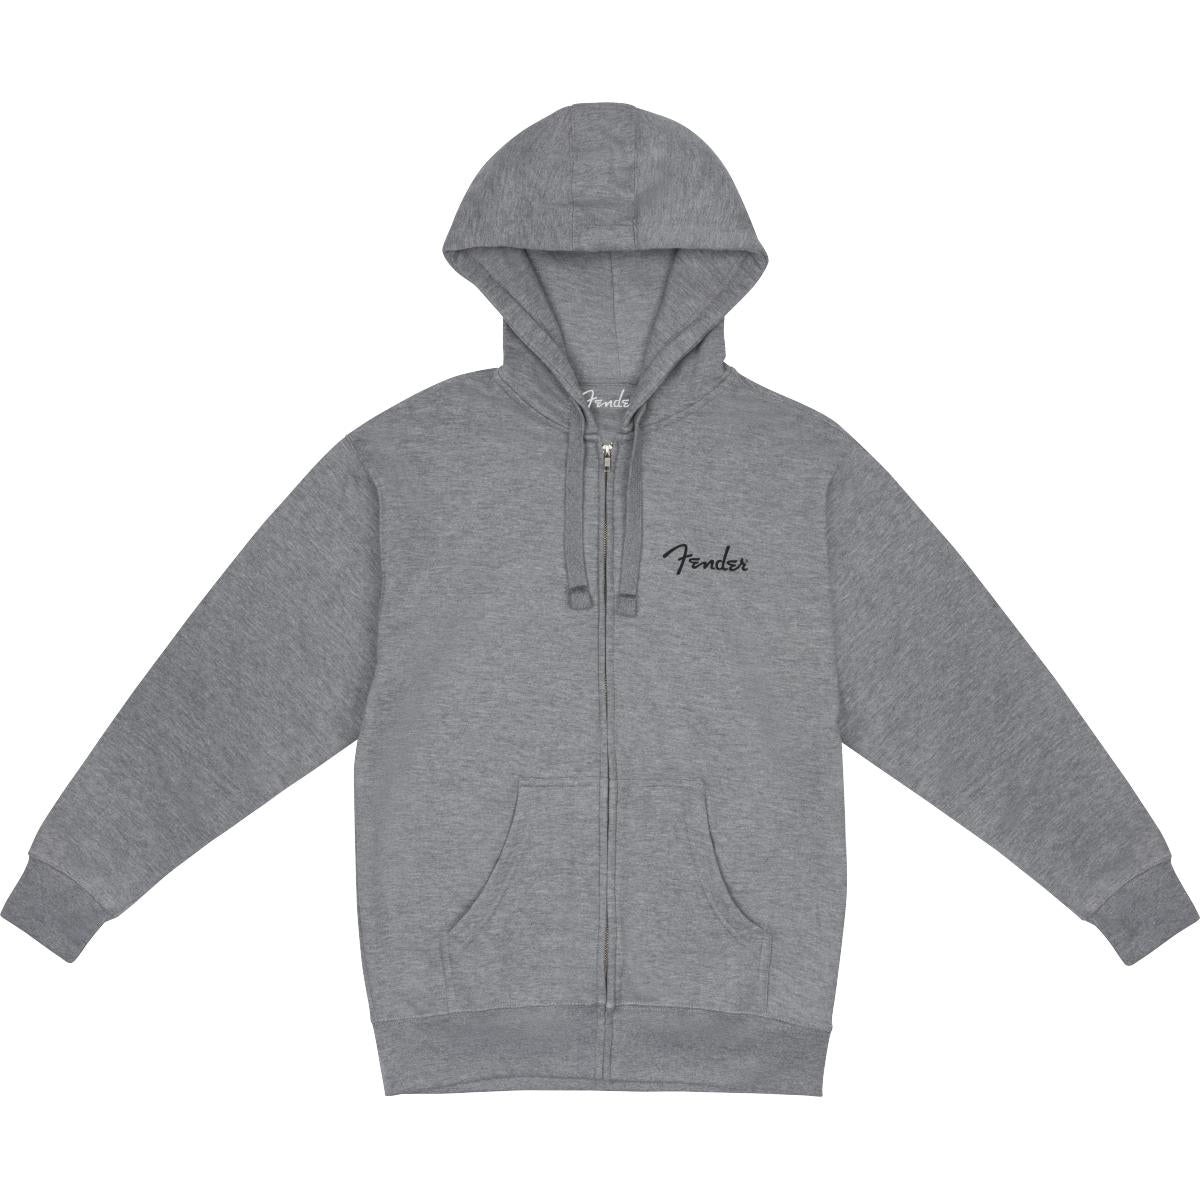 Fender Spaghetti Small Logo Zip Front Hoodie Athletic Gray S - 9113300306